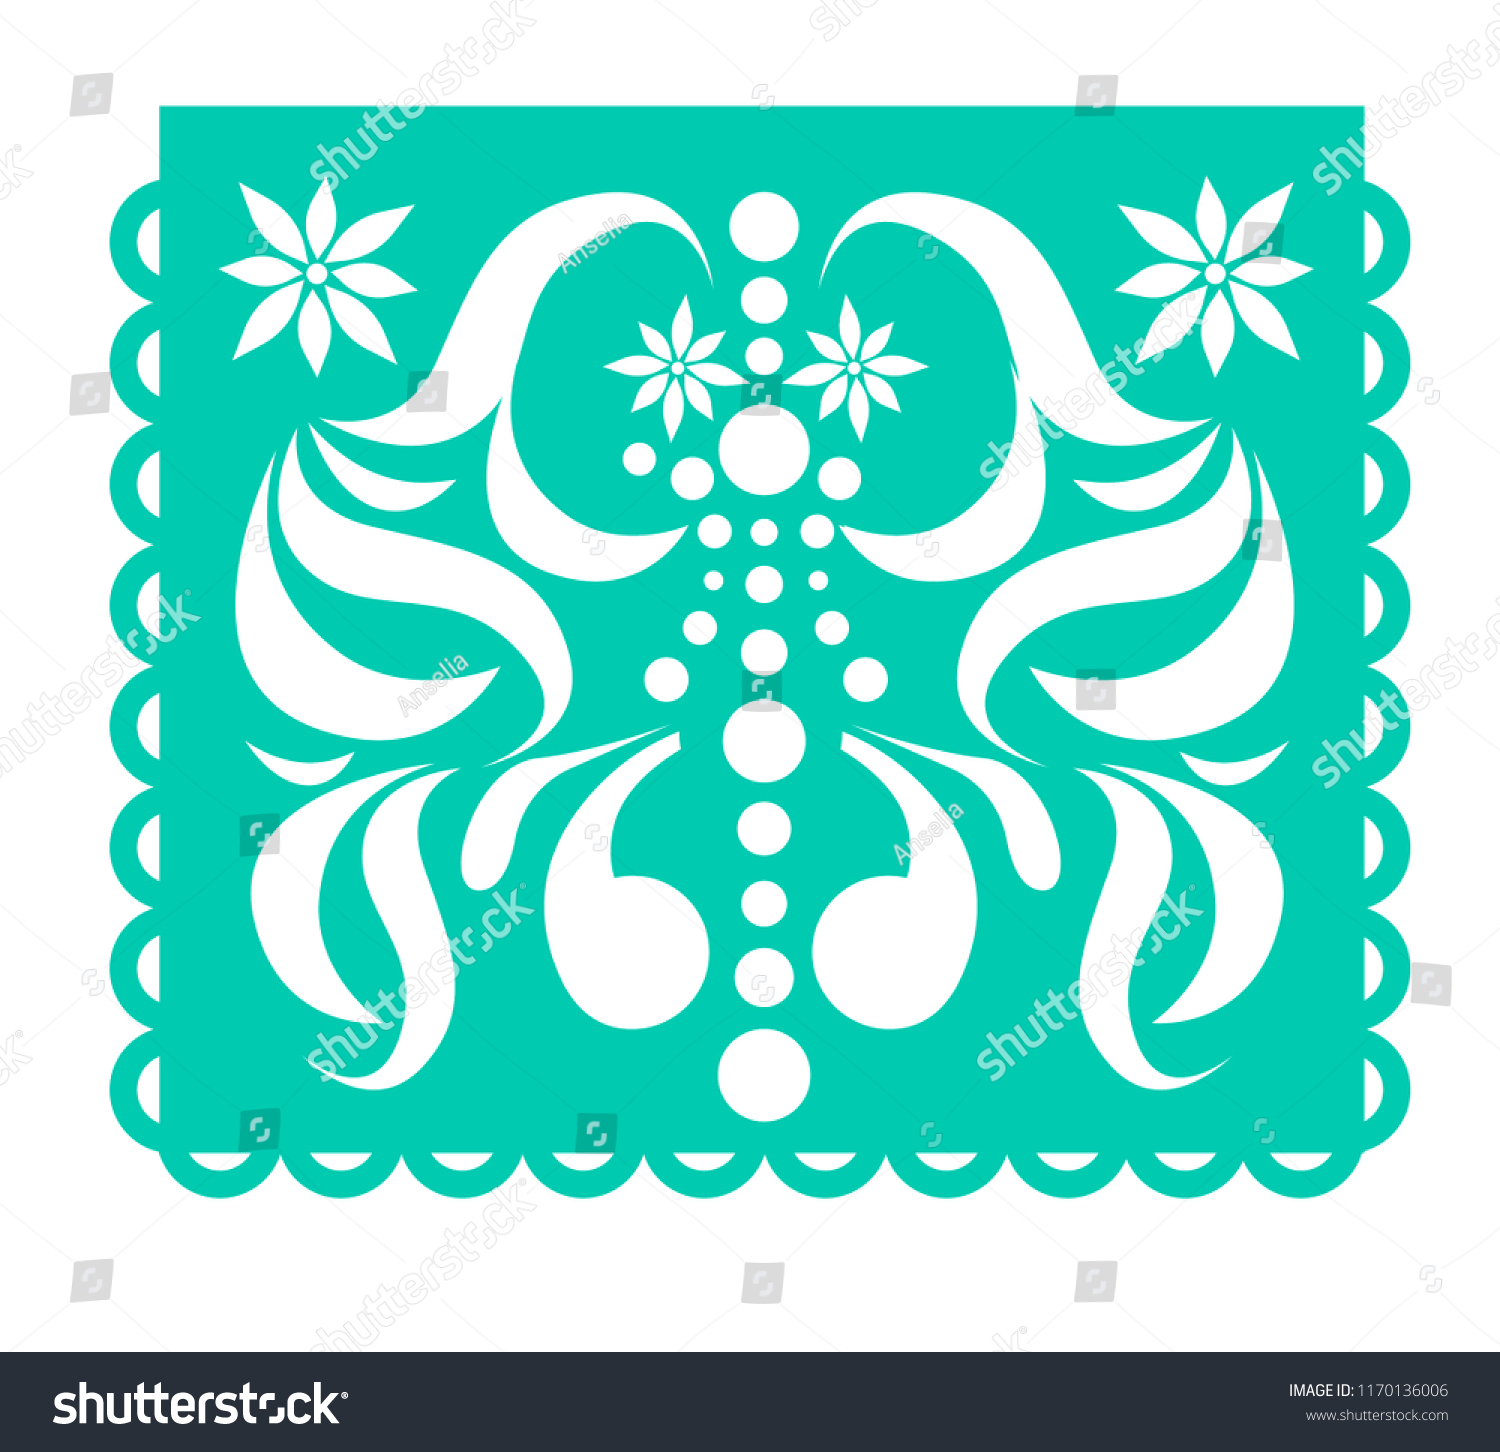 Mexican Paper Decorations Papel Picado Vector Stock Vector Royalty Free 1170136006 Shutterstock 9012